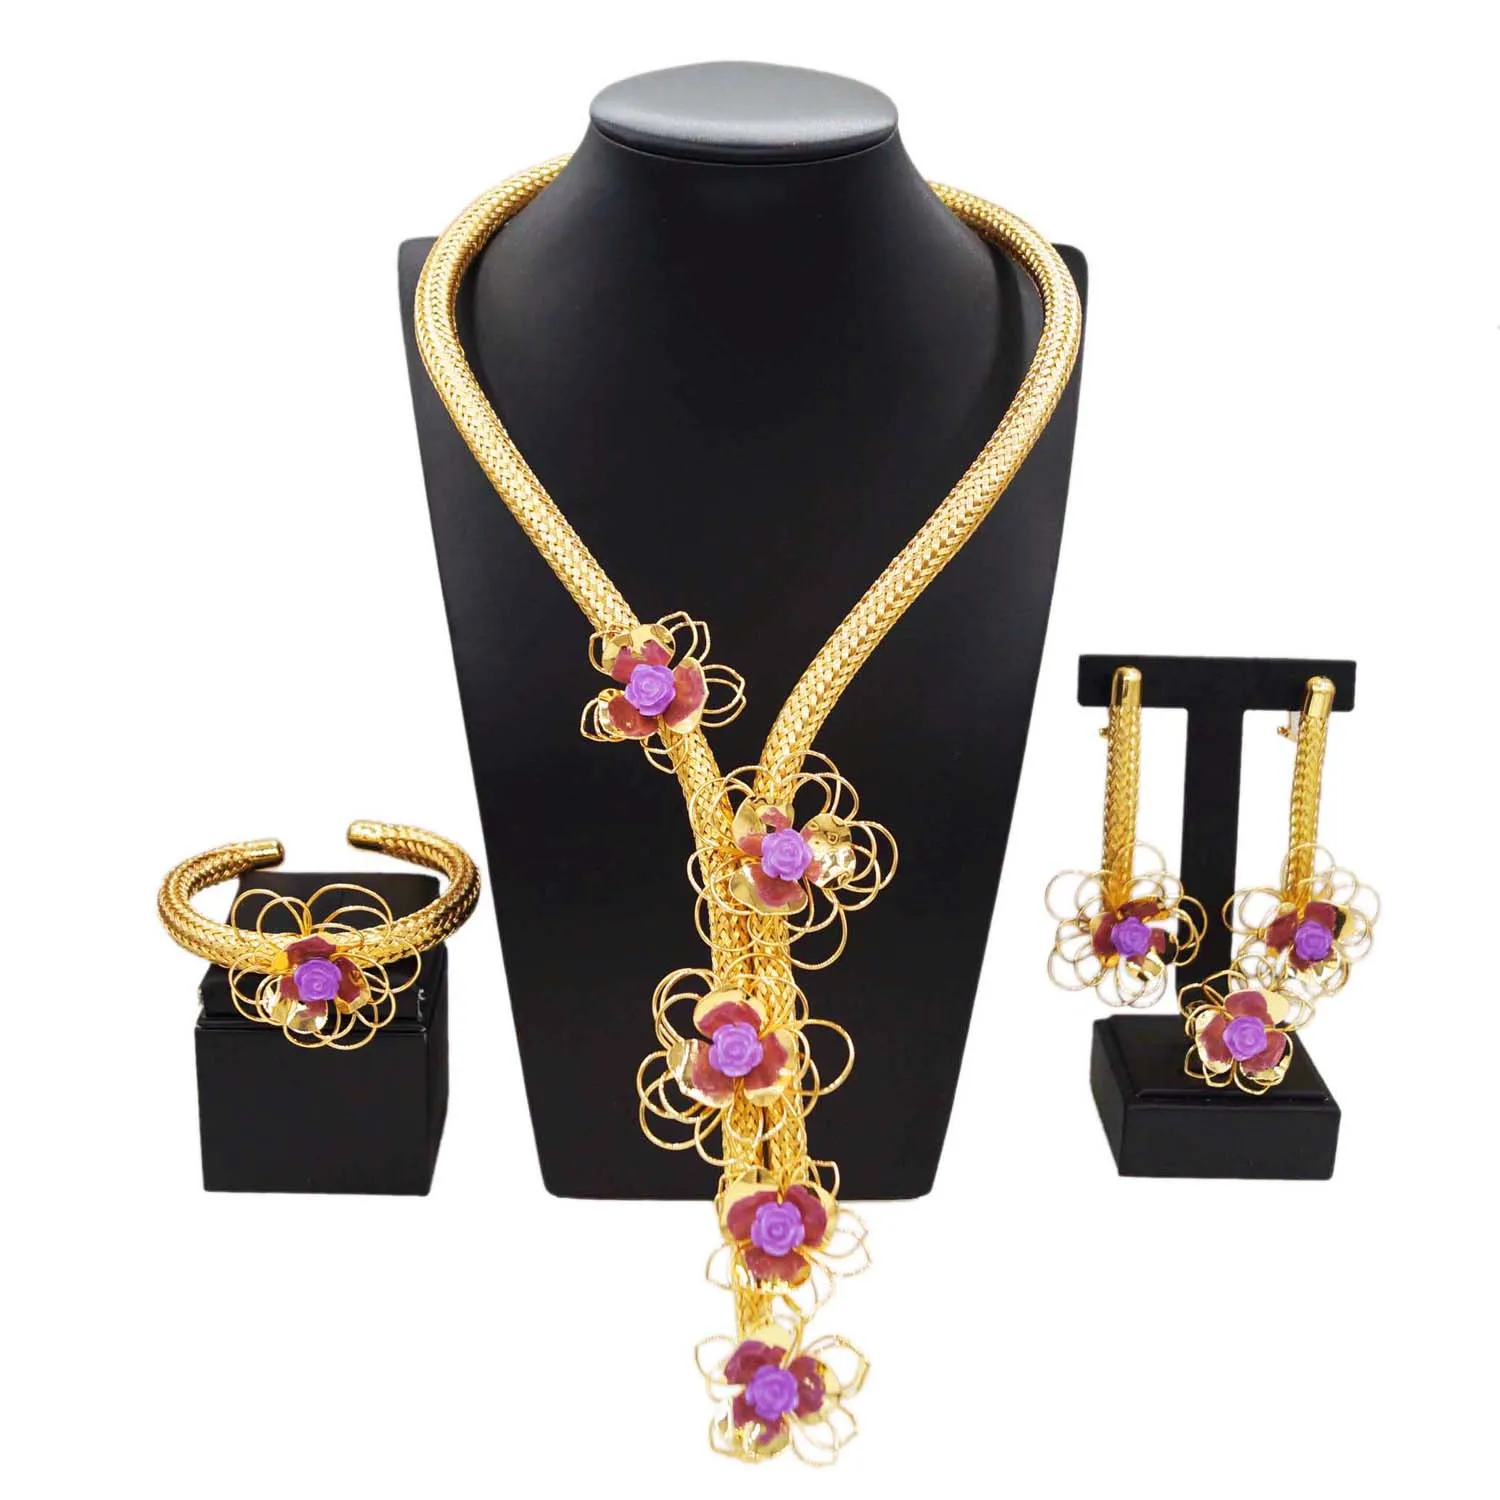 

Yulaili fashion new jewelry set Romantic flowers classic elegant French style high-end quality girl coming-of-age factory direct